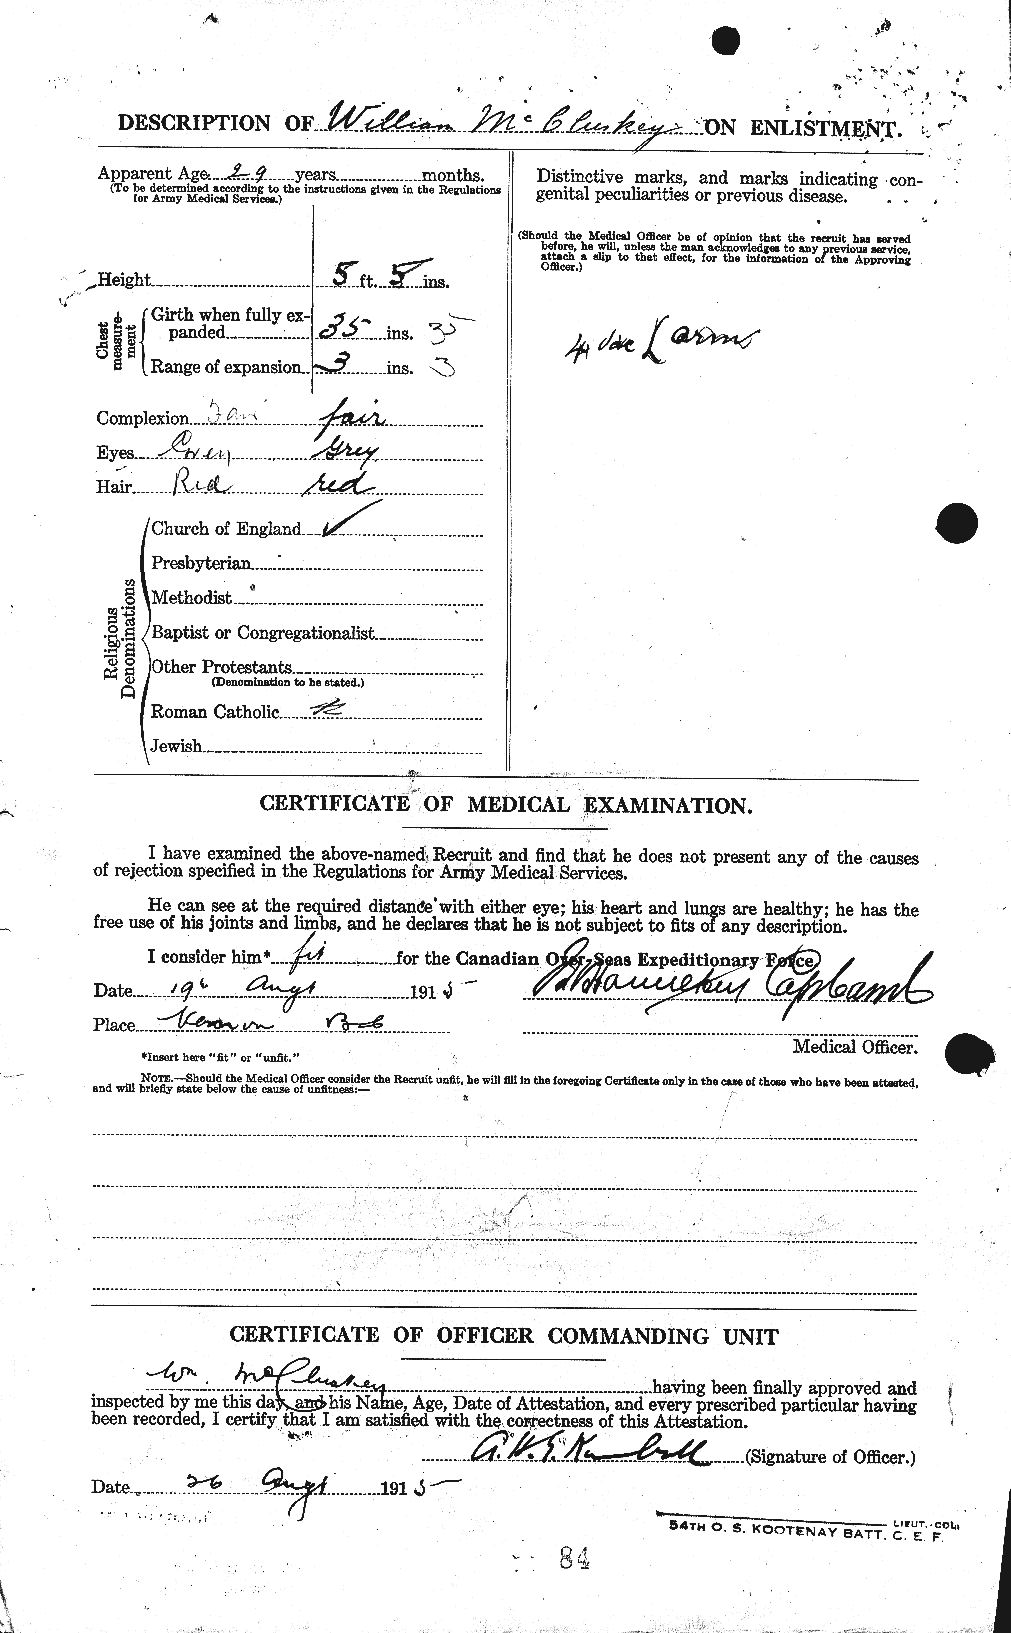 Personnel Records of the First World War - CEF 133469b